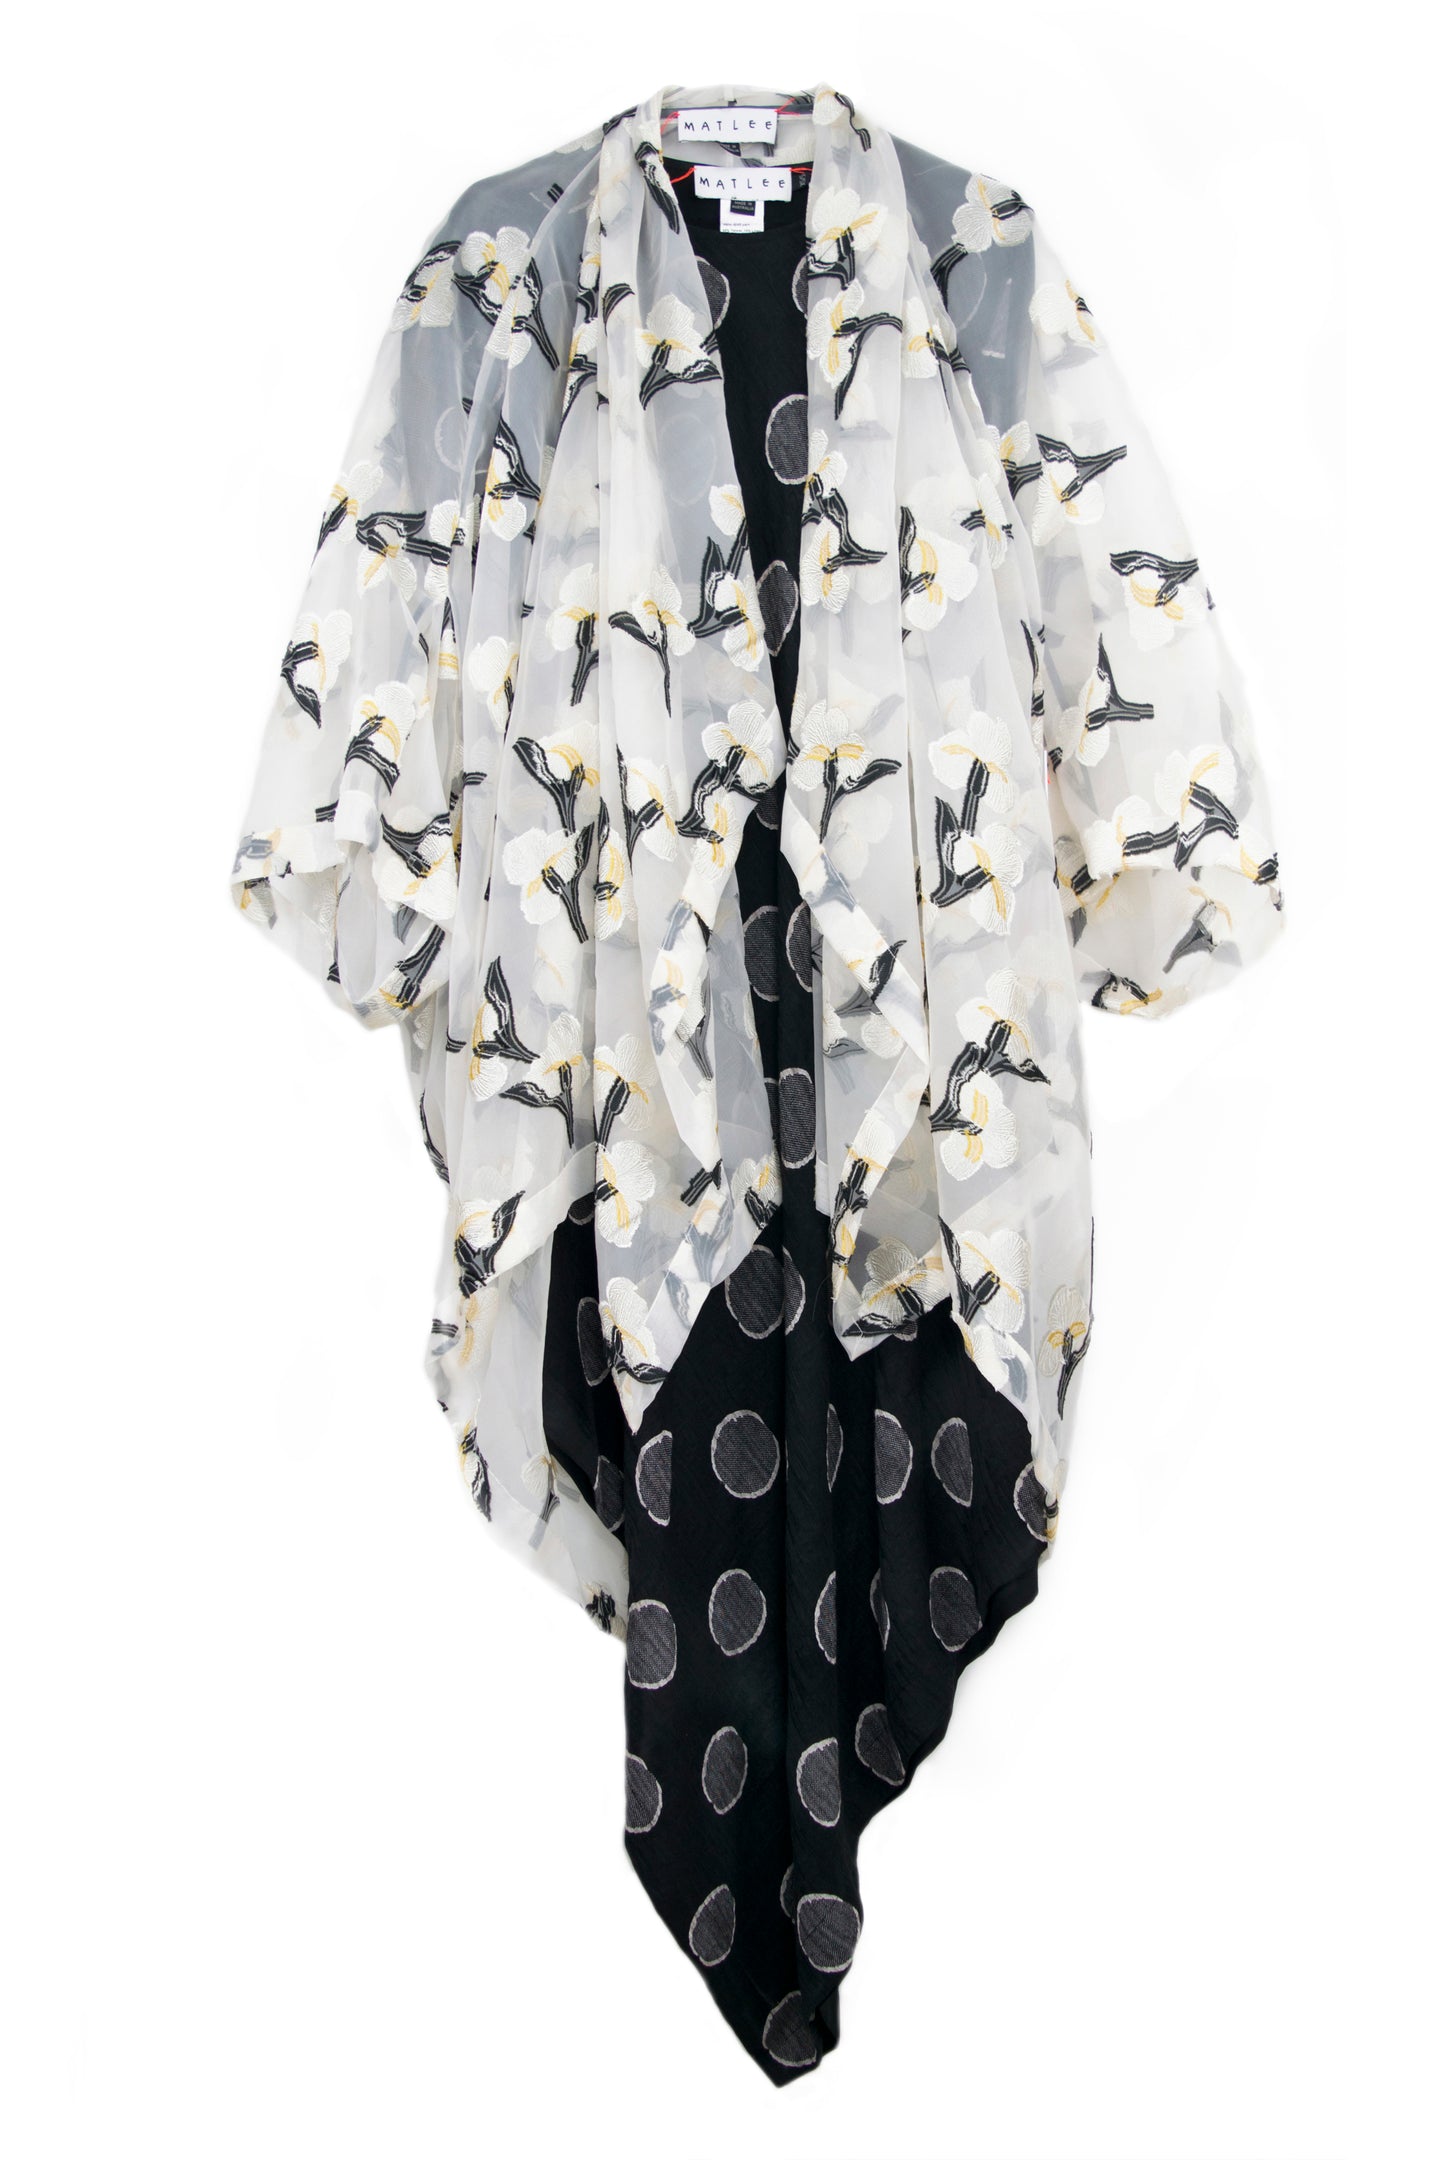 FLOWER OPERA COAT - LIMITED EDITION